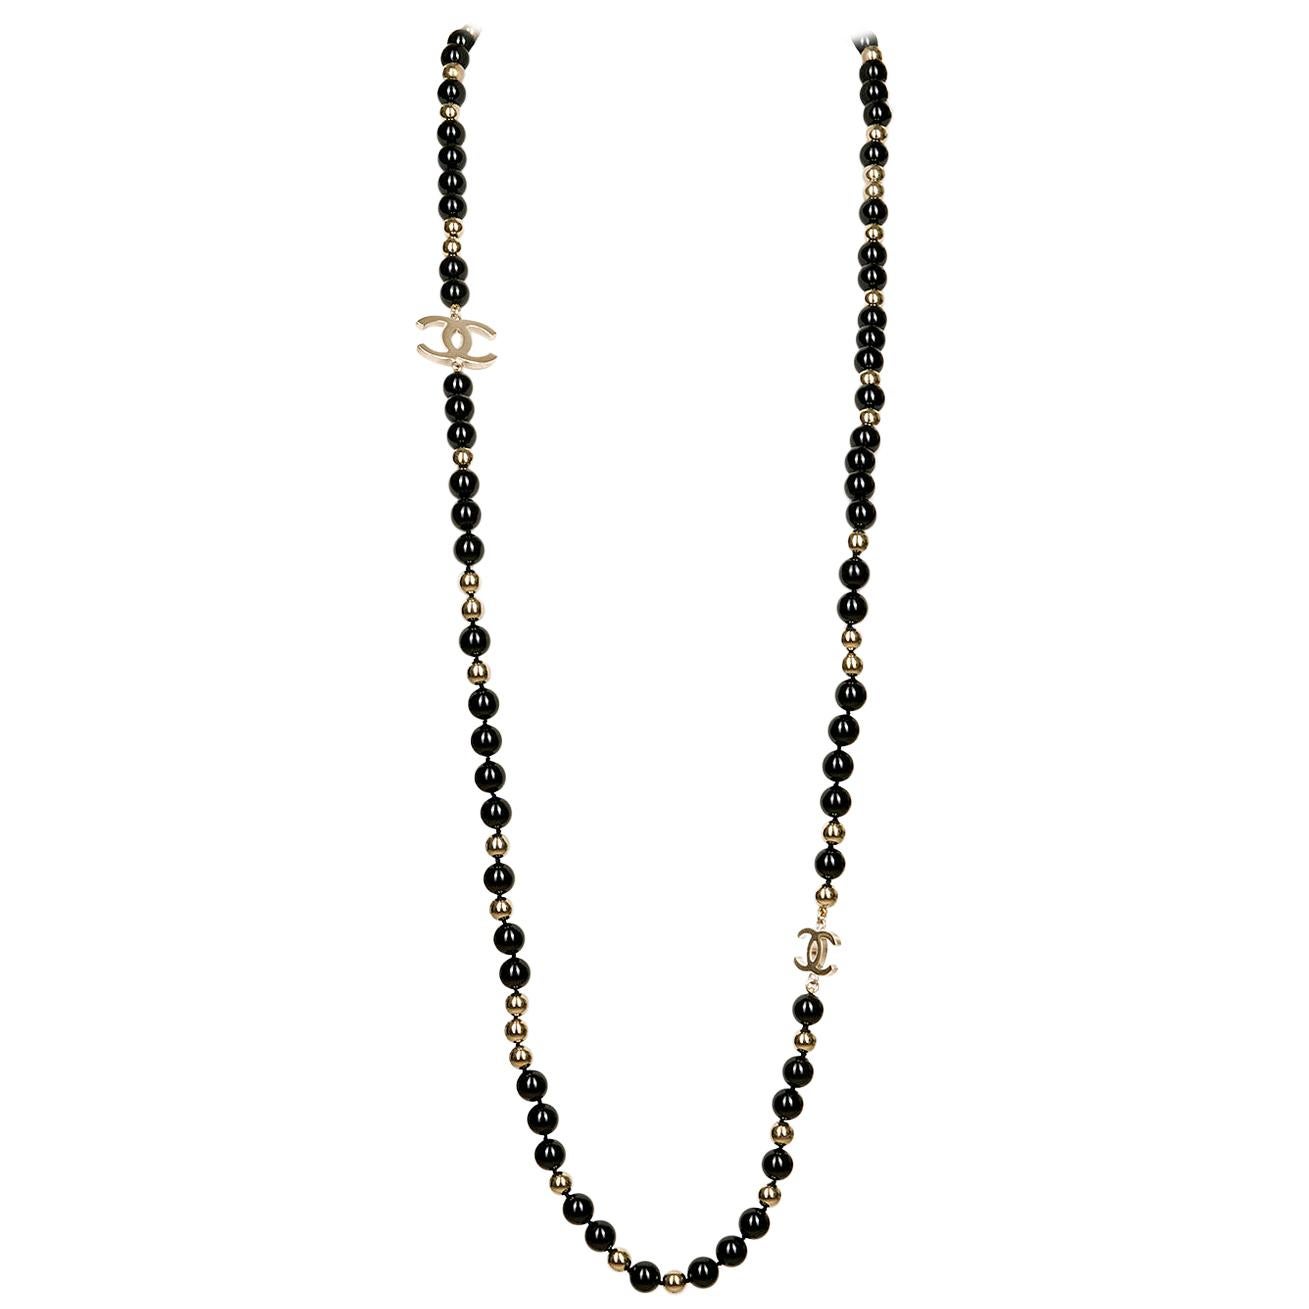 TRES CHIC Chanel Black & Gold 'CC' Necklace